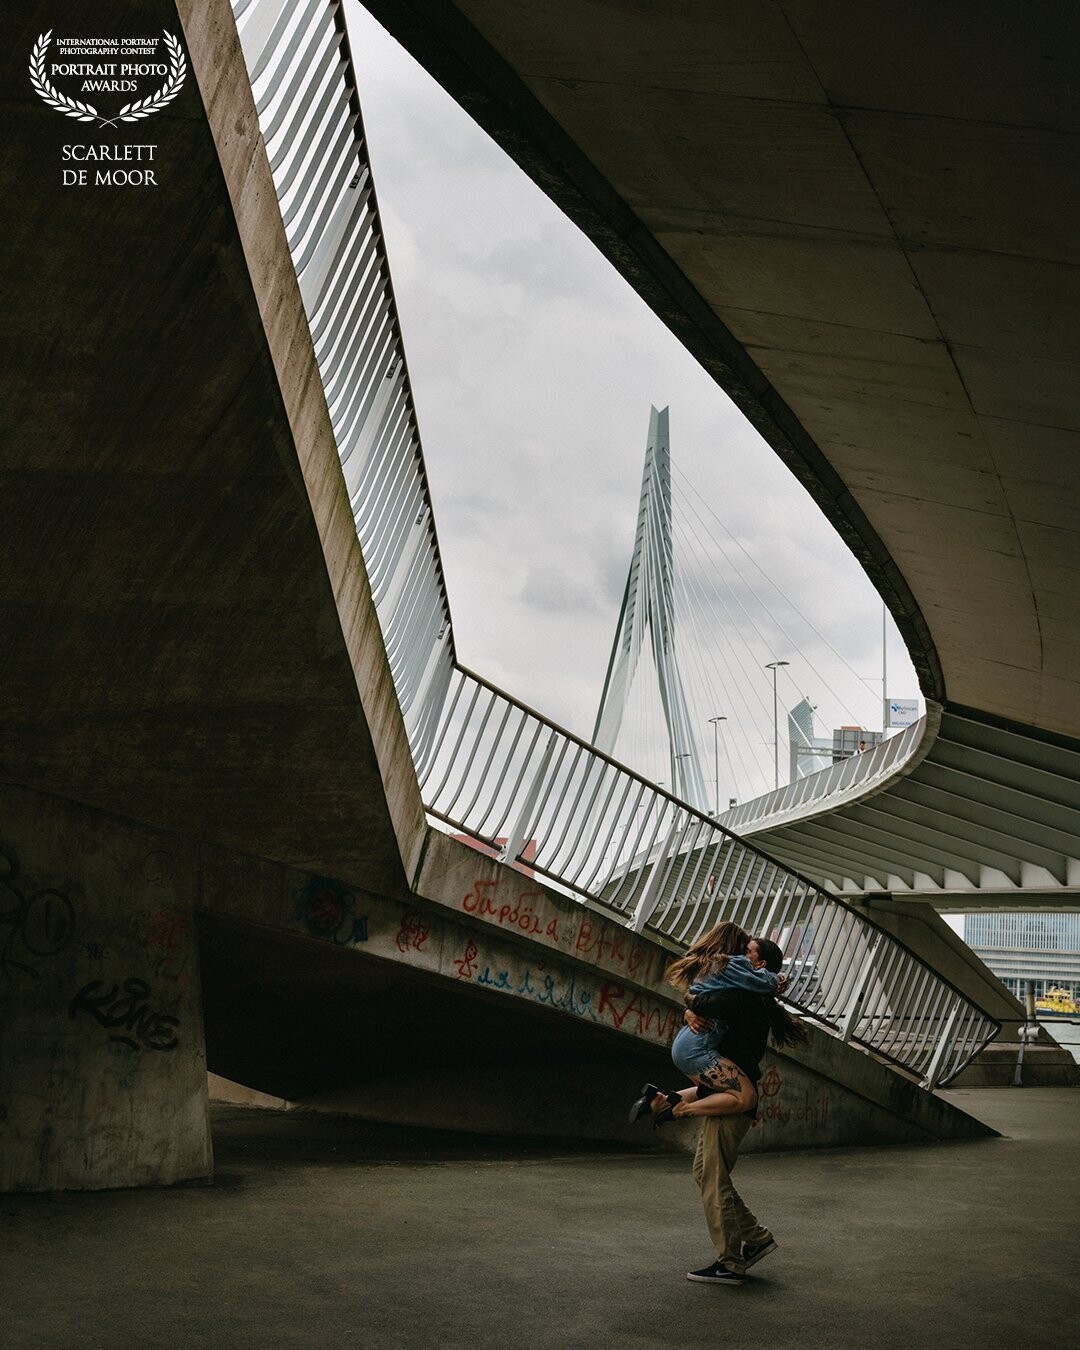 Gotta love love. Especially under the iconic Erasmus bridge in Rotterdam. I love how romance and architecture come together in this frame.